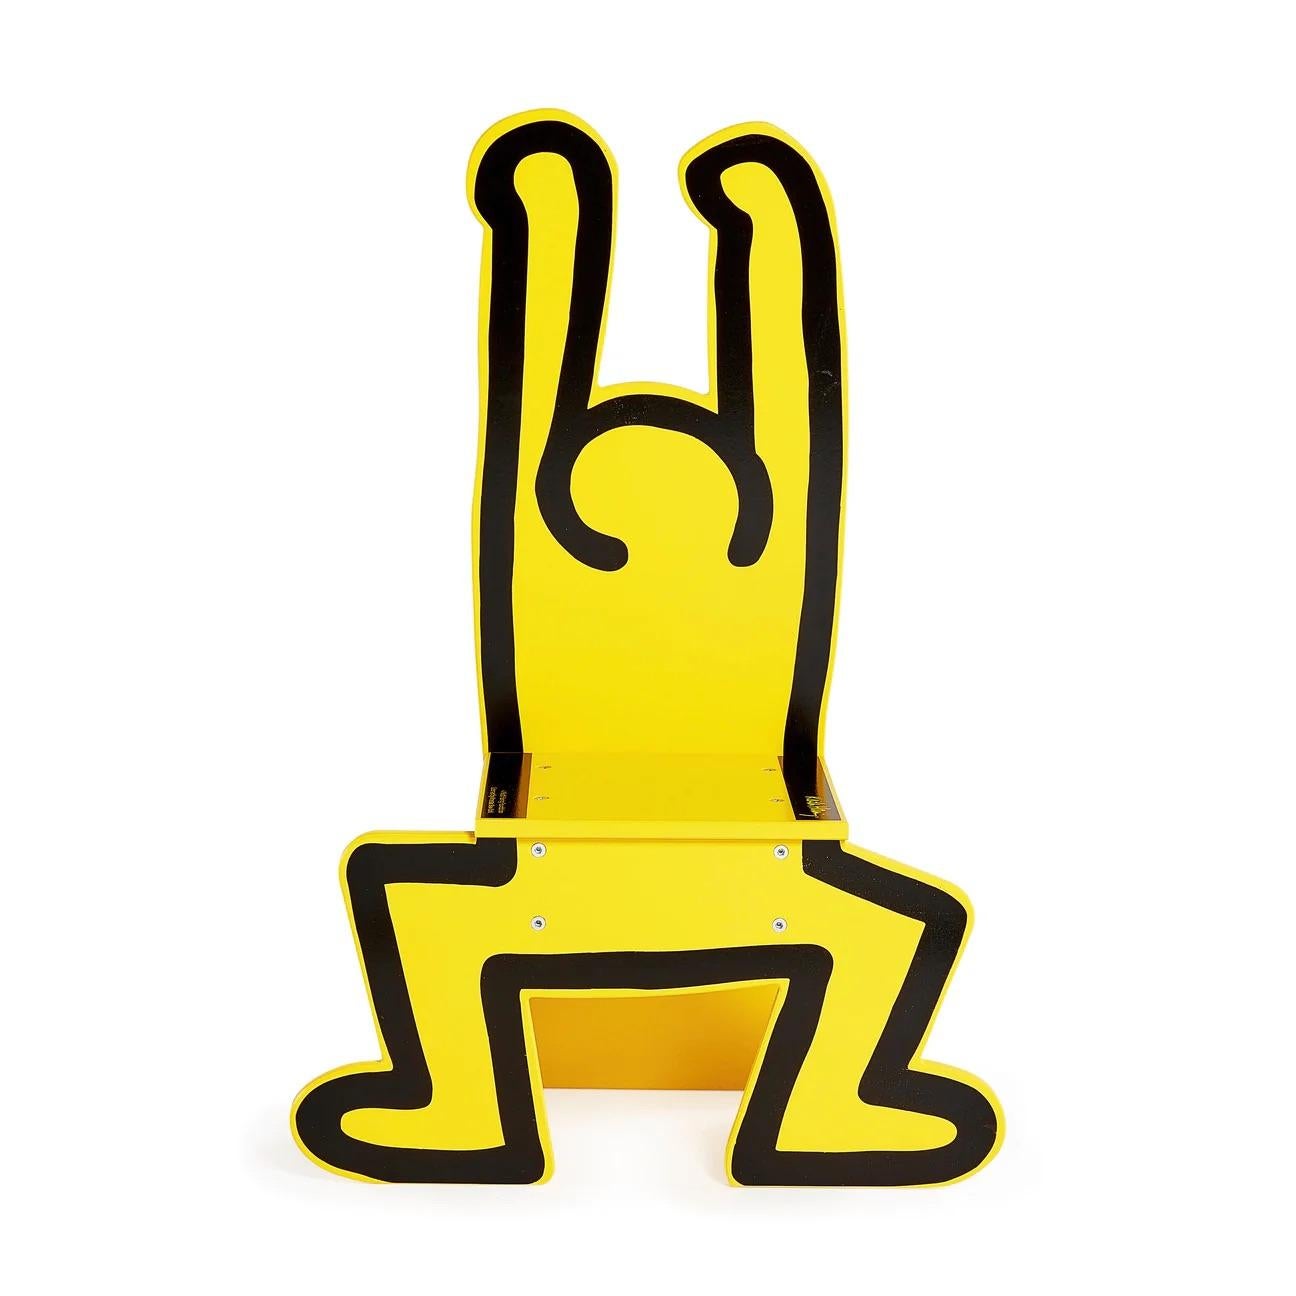 One of Keith Haring’s iconic and energetic figures that appeared in many of his paintings and sculptures during the 1980s is interpreted by French brand Vilac for this children’s chair. The Keith Haring Kids’ Chair is made in France from lacquered